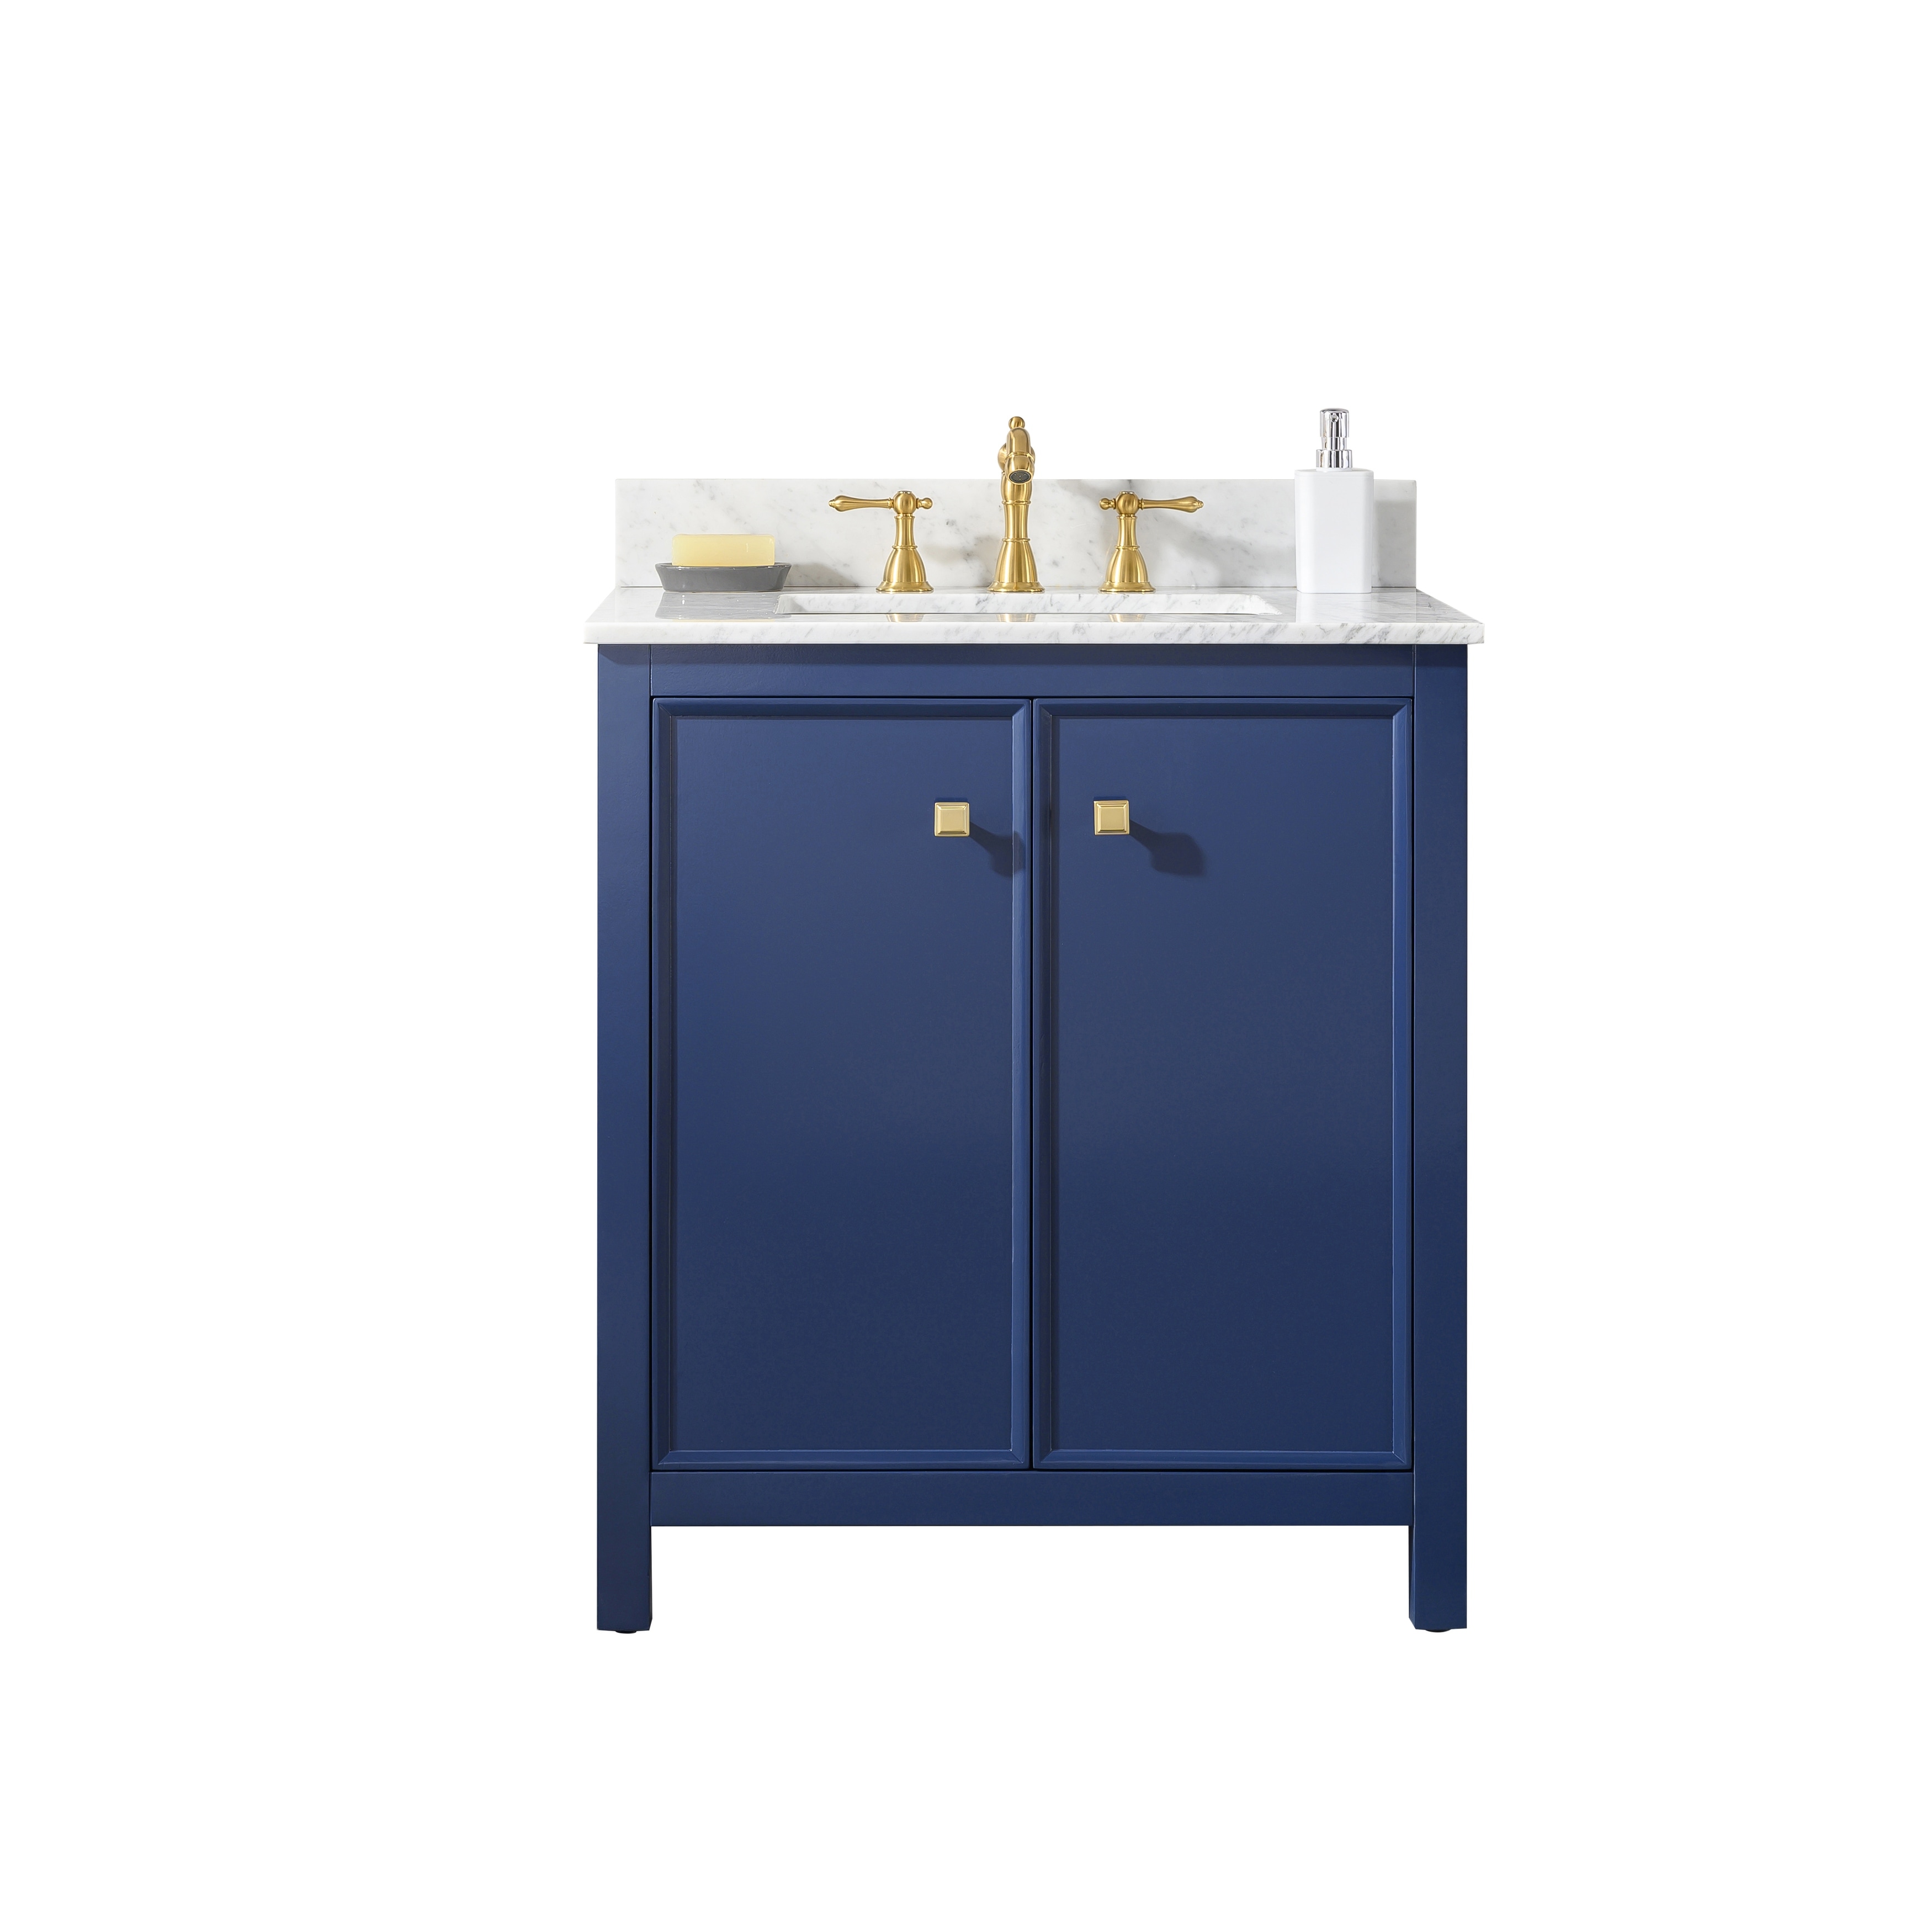 Shop For Legion Furniture 30 Blue Sink Vanity Wlf2130 B Get Free Delivery On Everything At Overstock Your Online Furniture Outlet Store Get 5 In Rewards With Club O 31590717